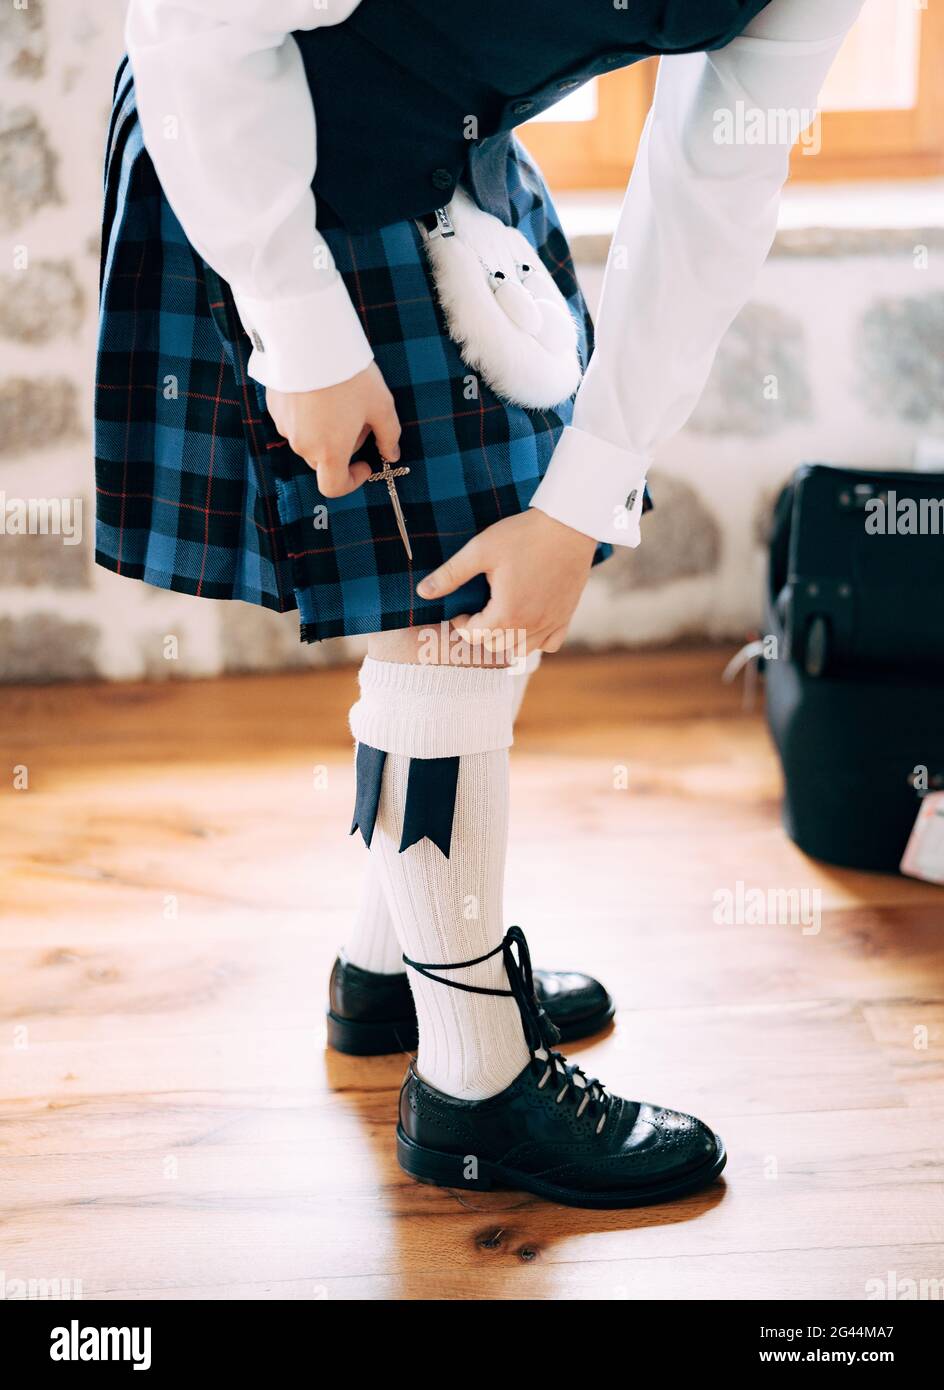 Preparing for a Scottish wedding. Man in high socks, sporran and shoes with long laces attaches a small sword to the kilt Stock Photo